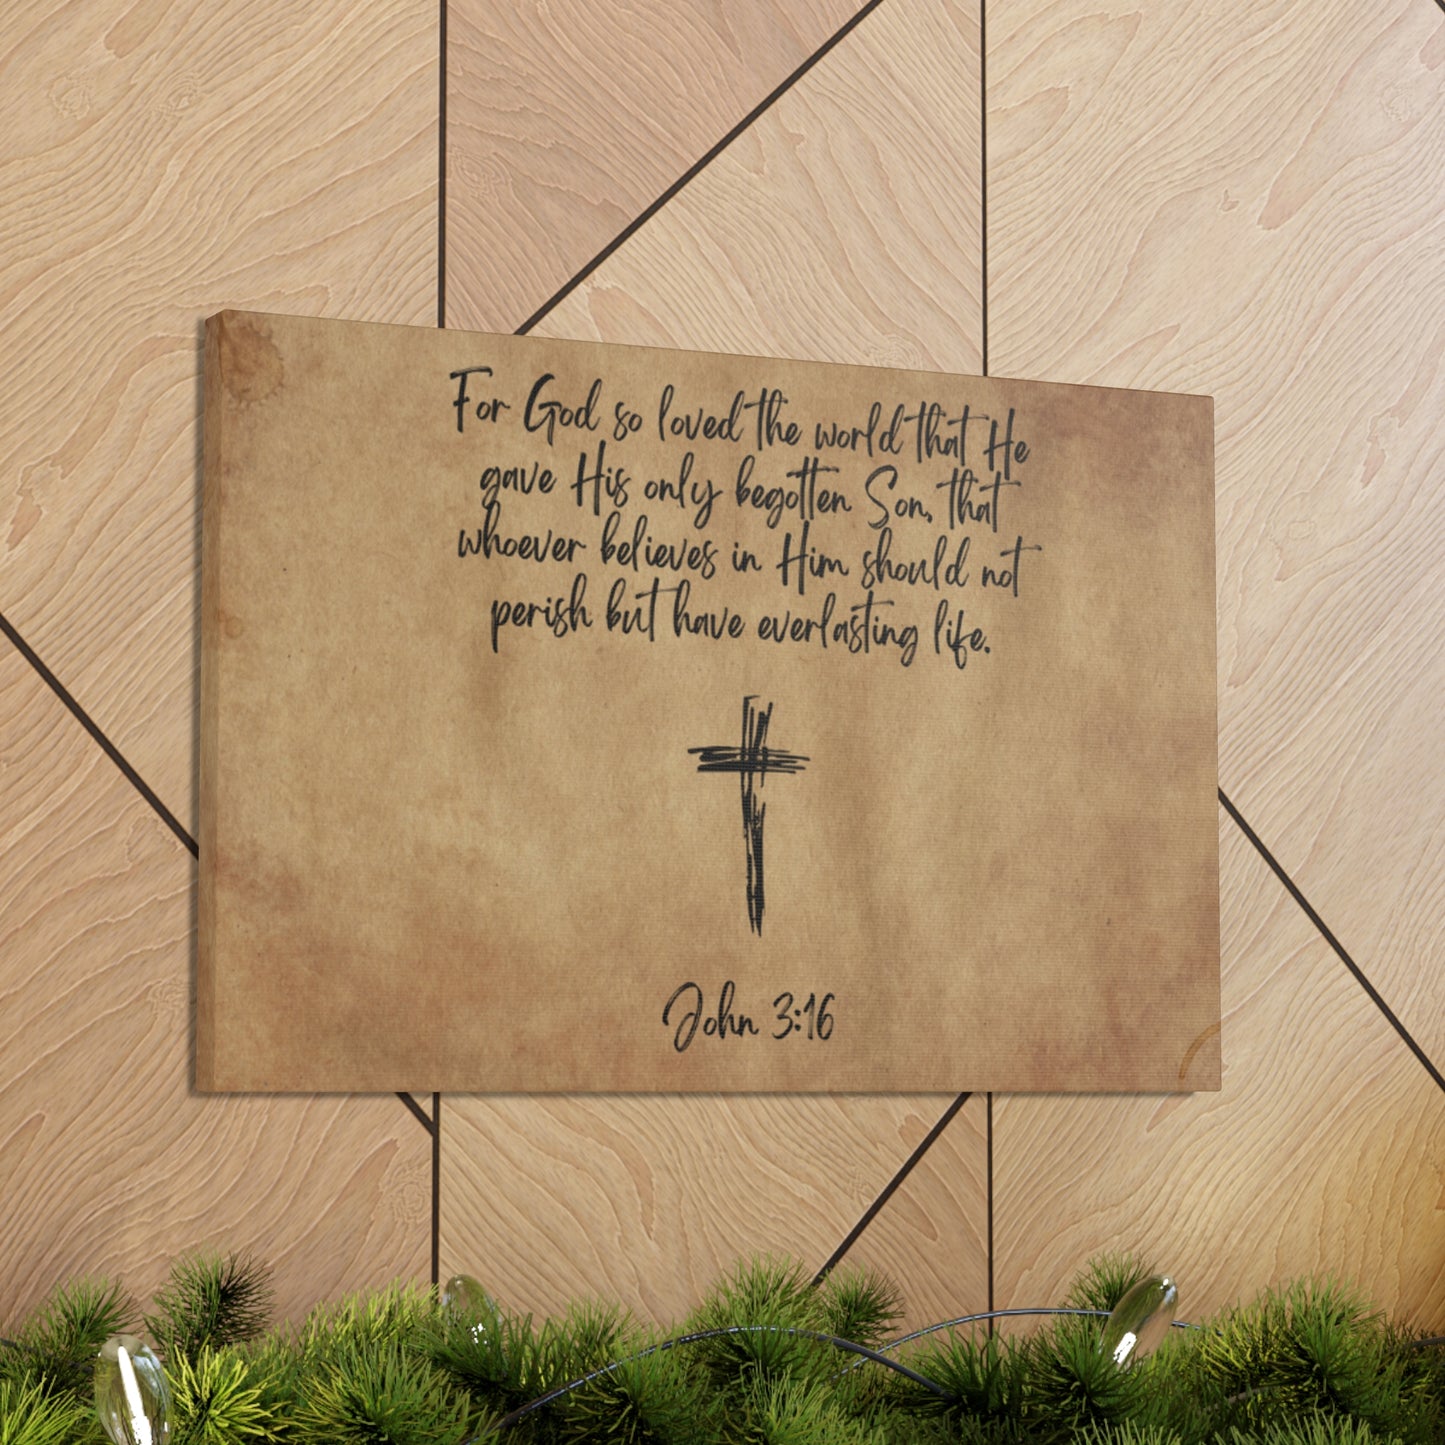 "John 3:16" Wall Art - Weave Got Gifts - Unique Gifts You Won’t Find Anywhere Else!